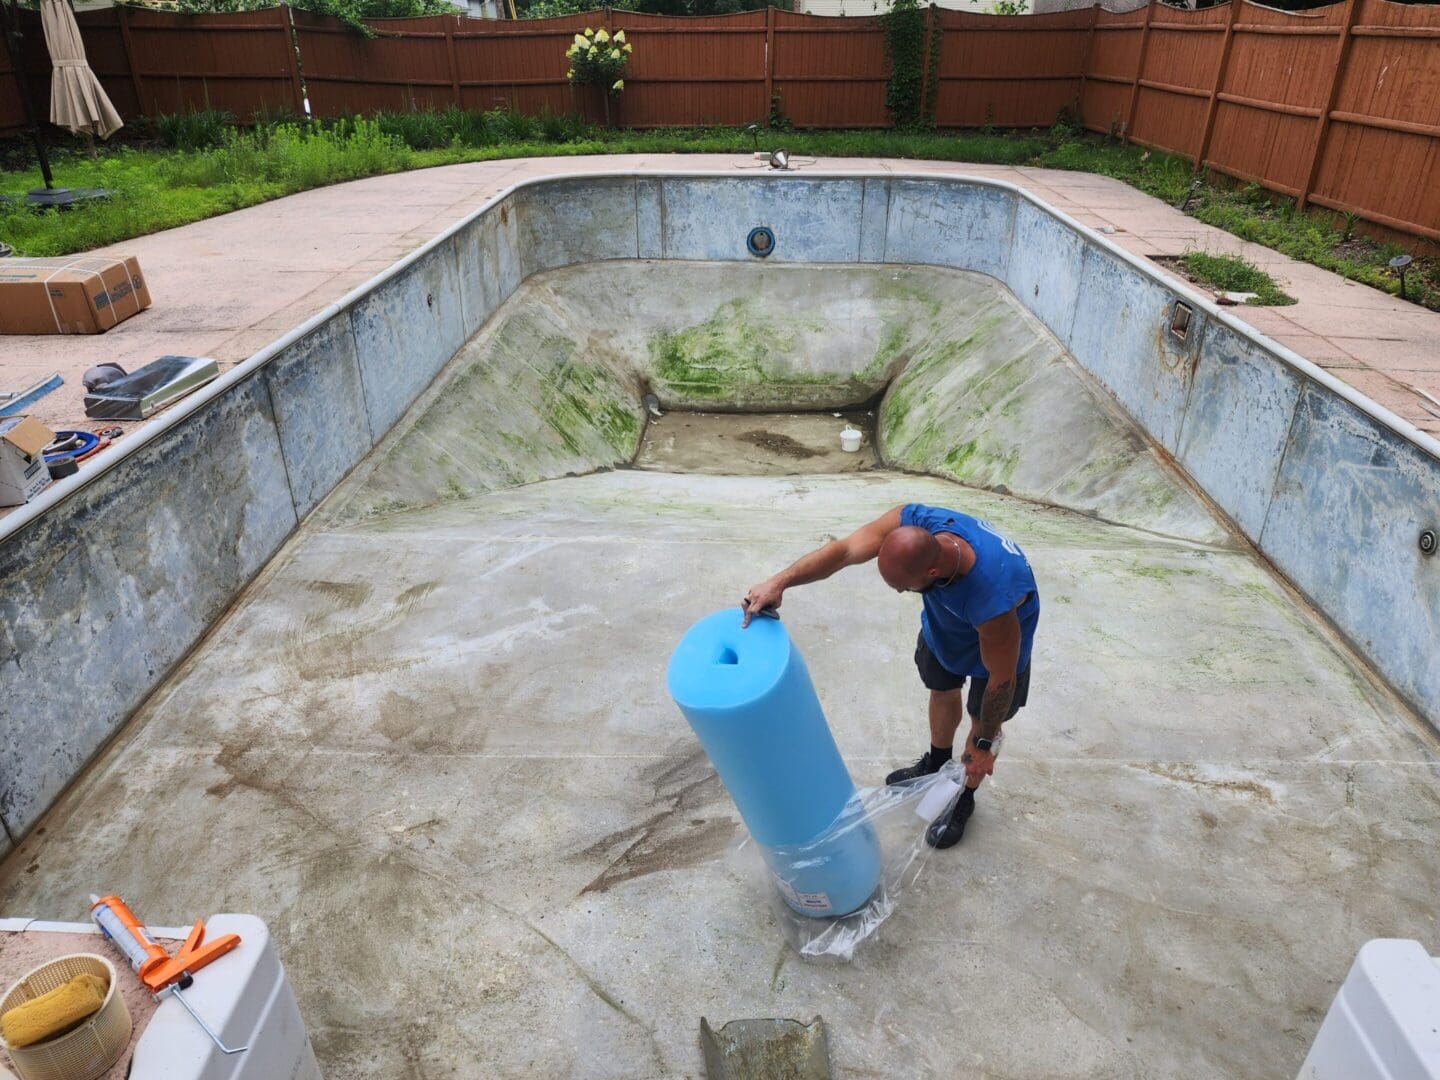 A man in blue shirt standing next to pool.